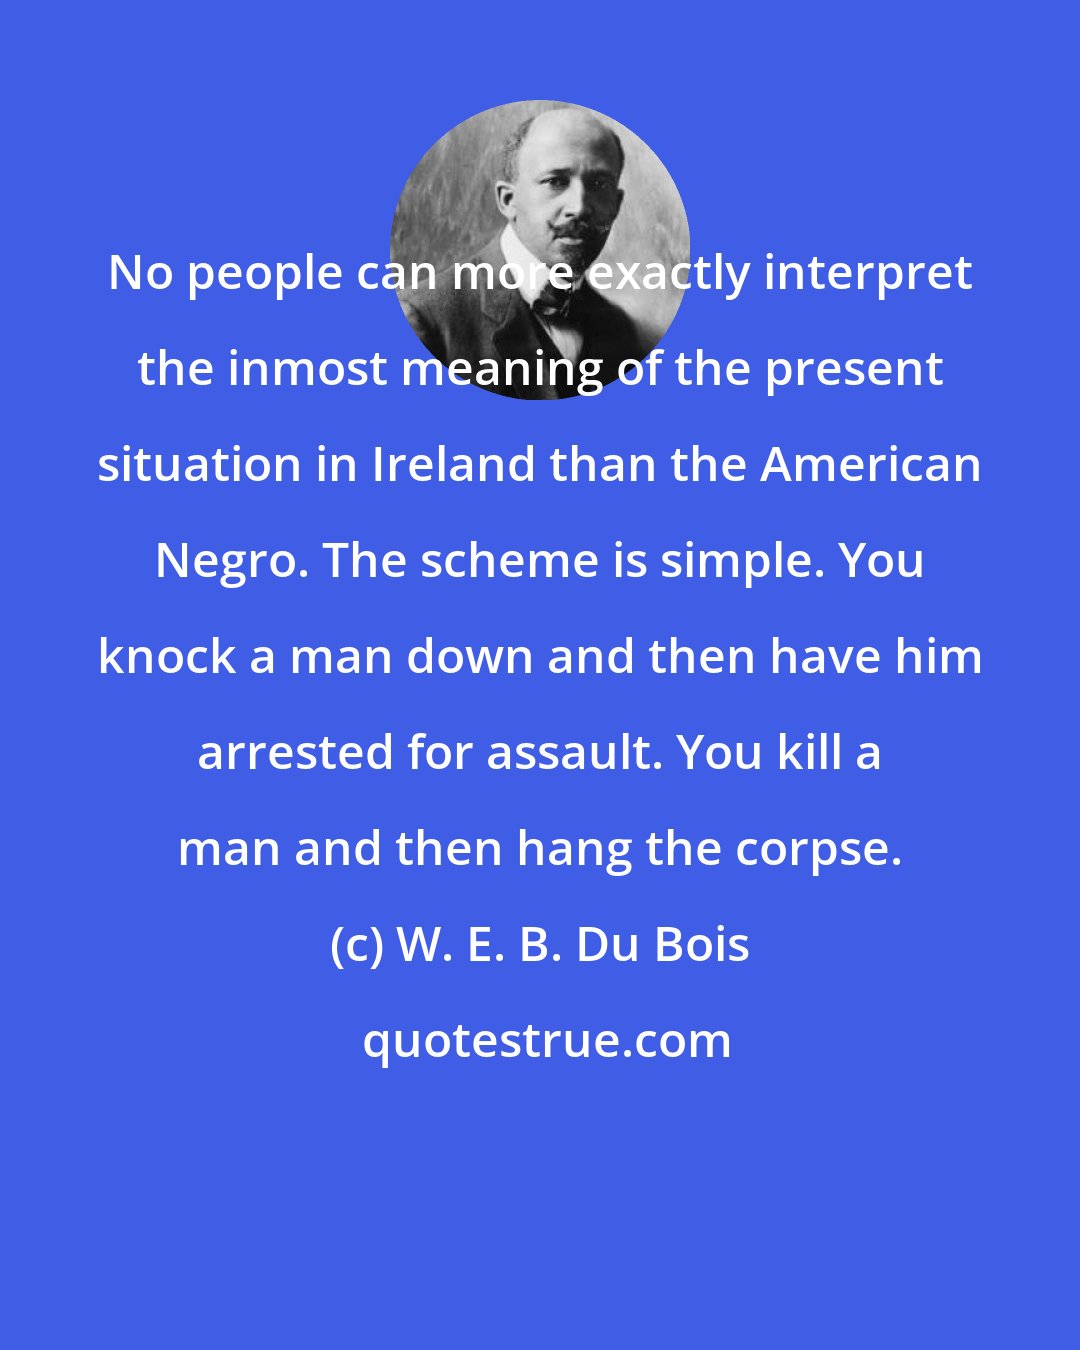 W. E. B. Du Bois: No people can more exactly interpret the inmost meaning of the present situation in Ireland than the American Negro. The scheme is simple. You knock a man down and then have him arrested for assault. You kill a man and then hang the corpse.